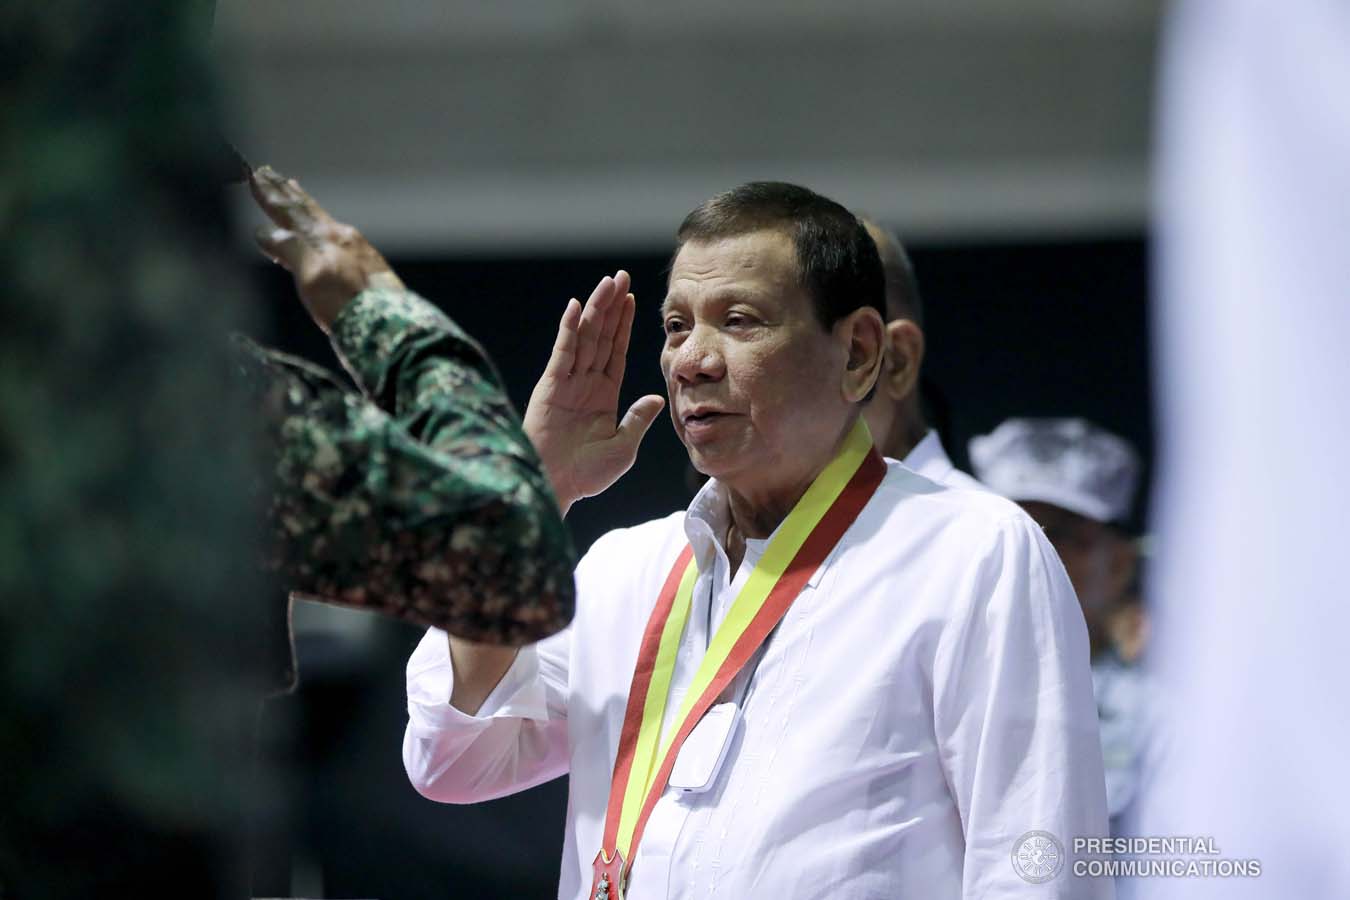 President Rodrigo Roa Duterte salutes one of the personnel of the Philippine Marine Corps, who was conferred the Order of Lapu-Lapu Rank of Kamagi during his visit to the PMC headquarters at Fort Bonifacio in Taguig City on January 13, 2020. The President honored the PMC personnel who took part in the liberation of Marawi City from the terrorists. ALFRED FRIAS/PRESIDENTIAL PHOTO